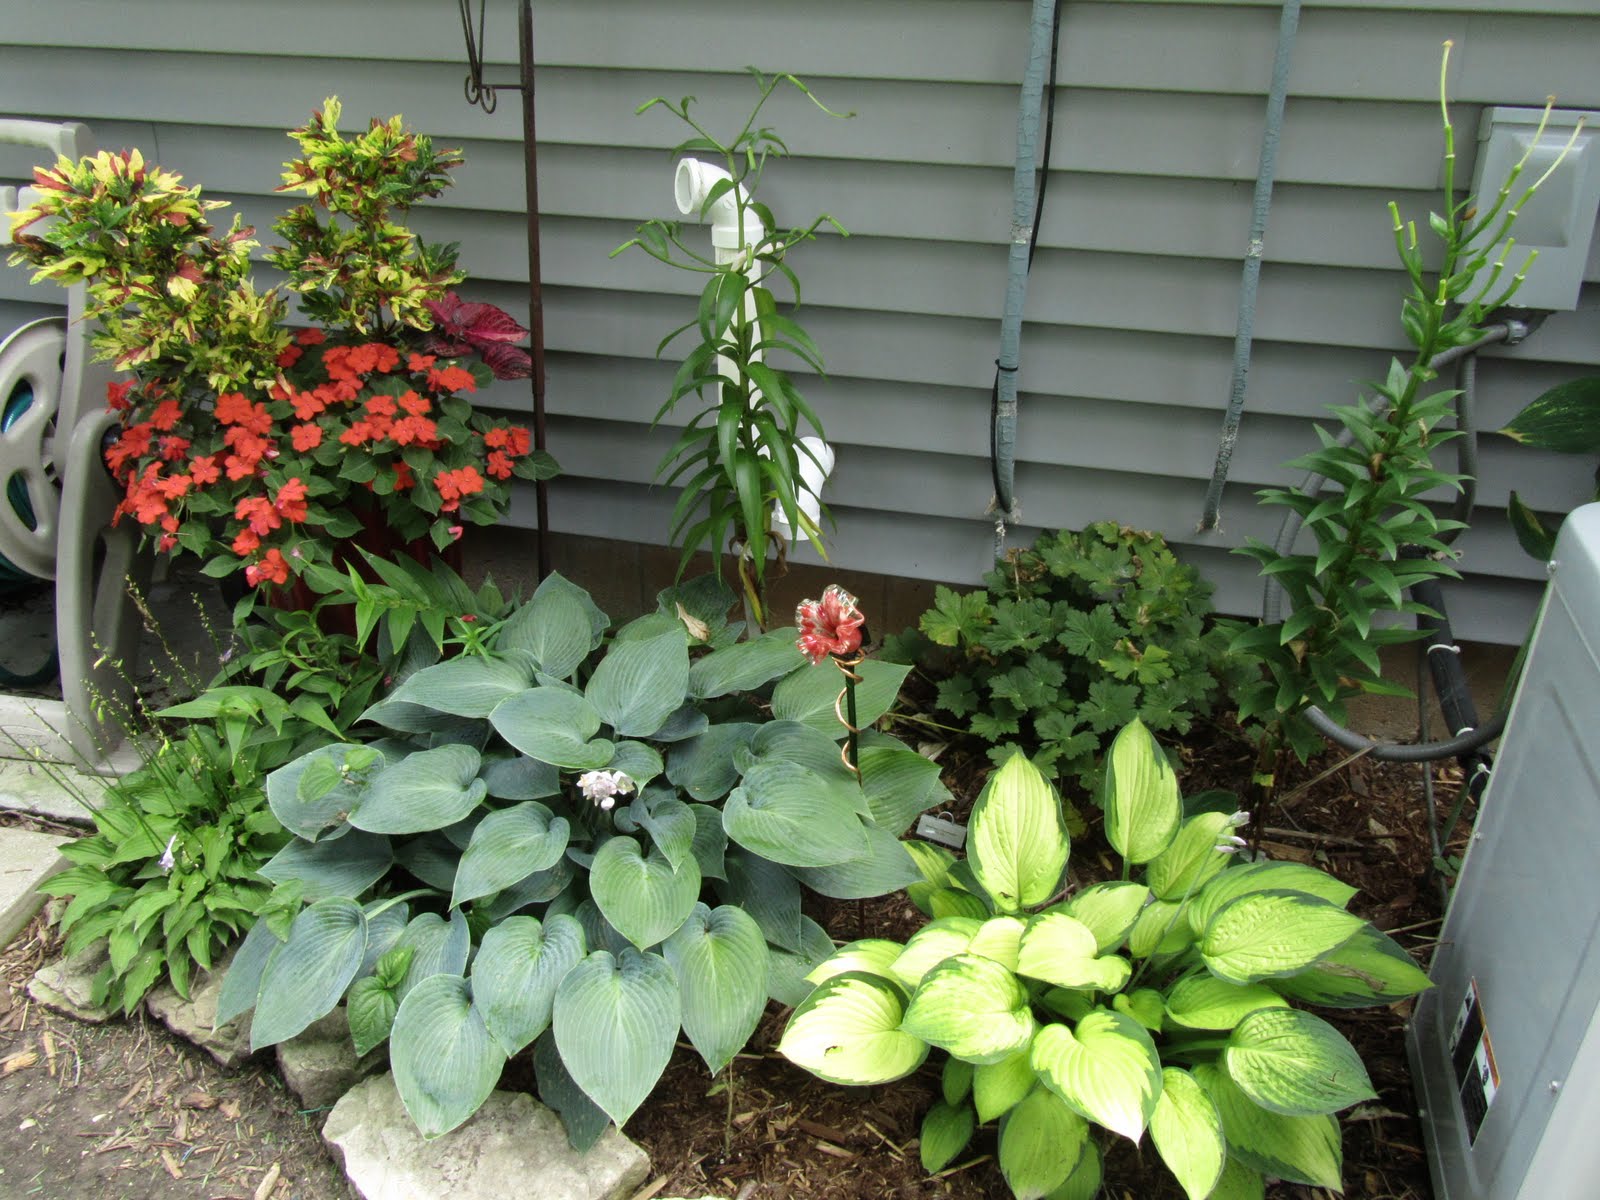 Cheesehead Gardening: Using containers to brighten up shady spots